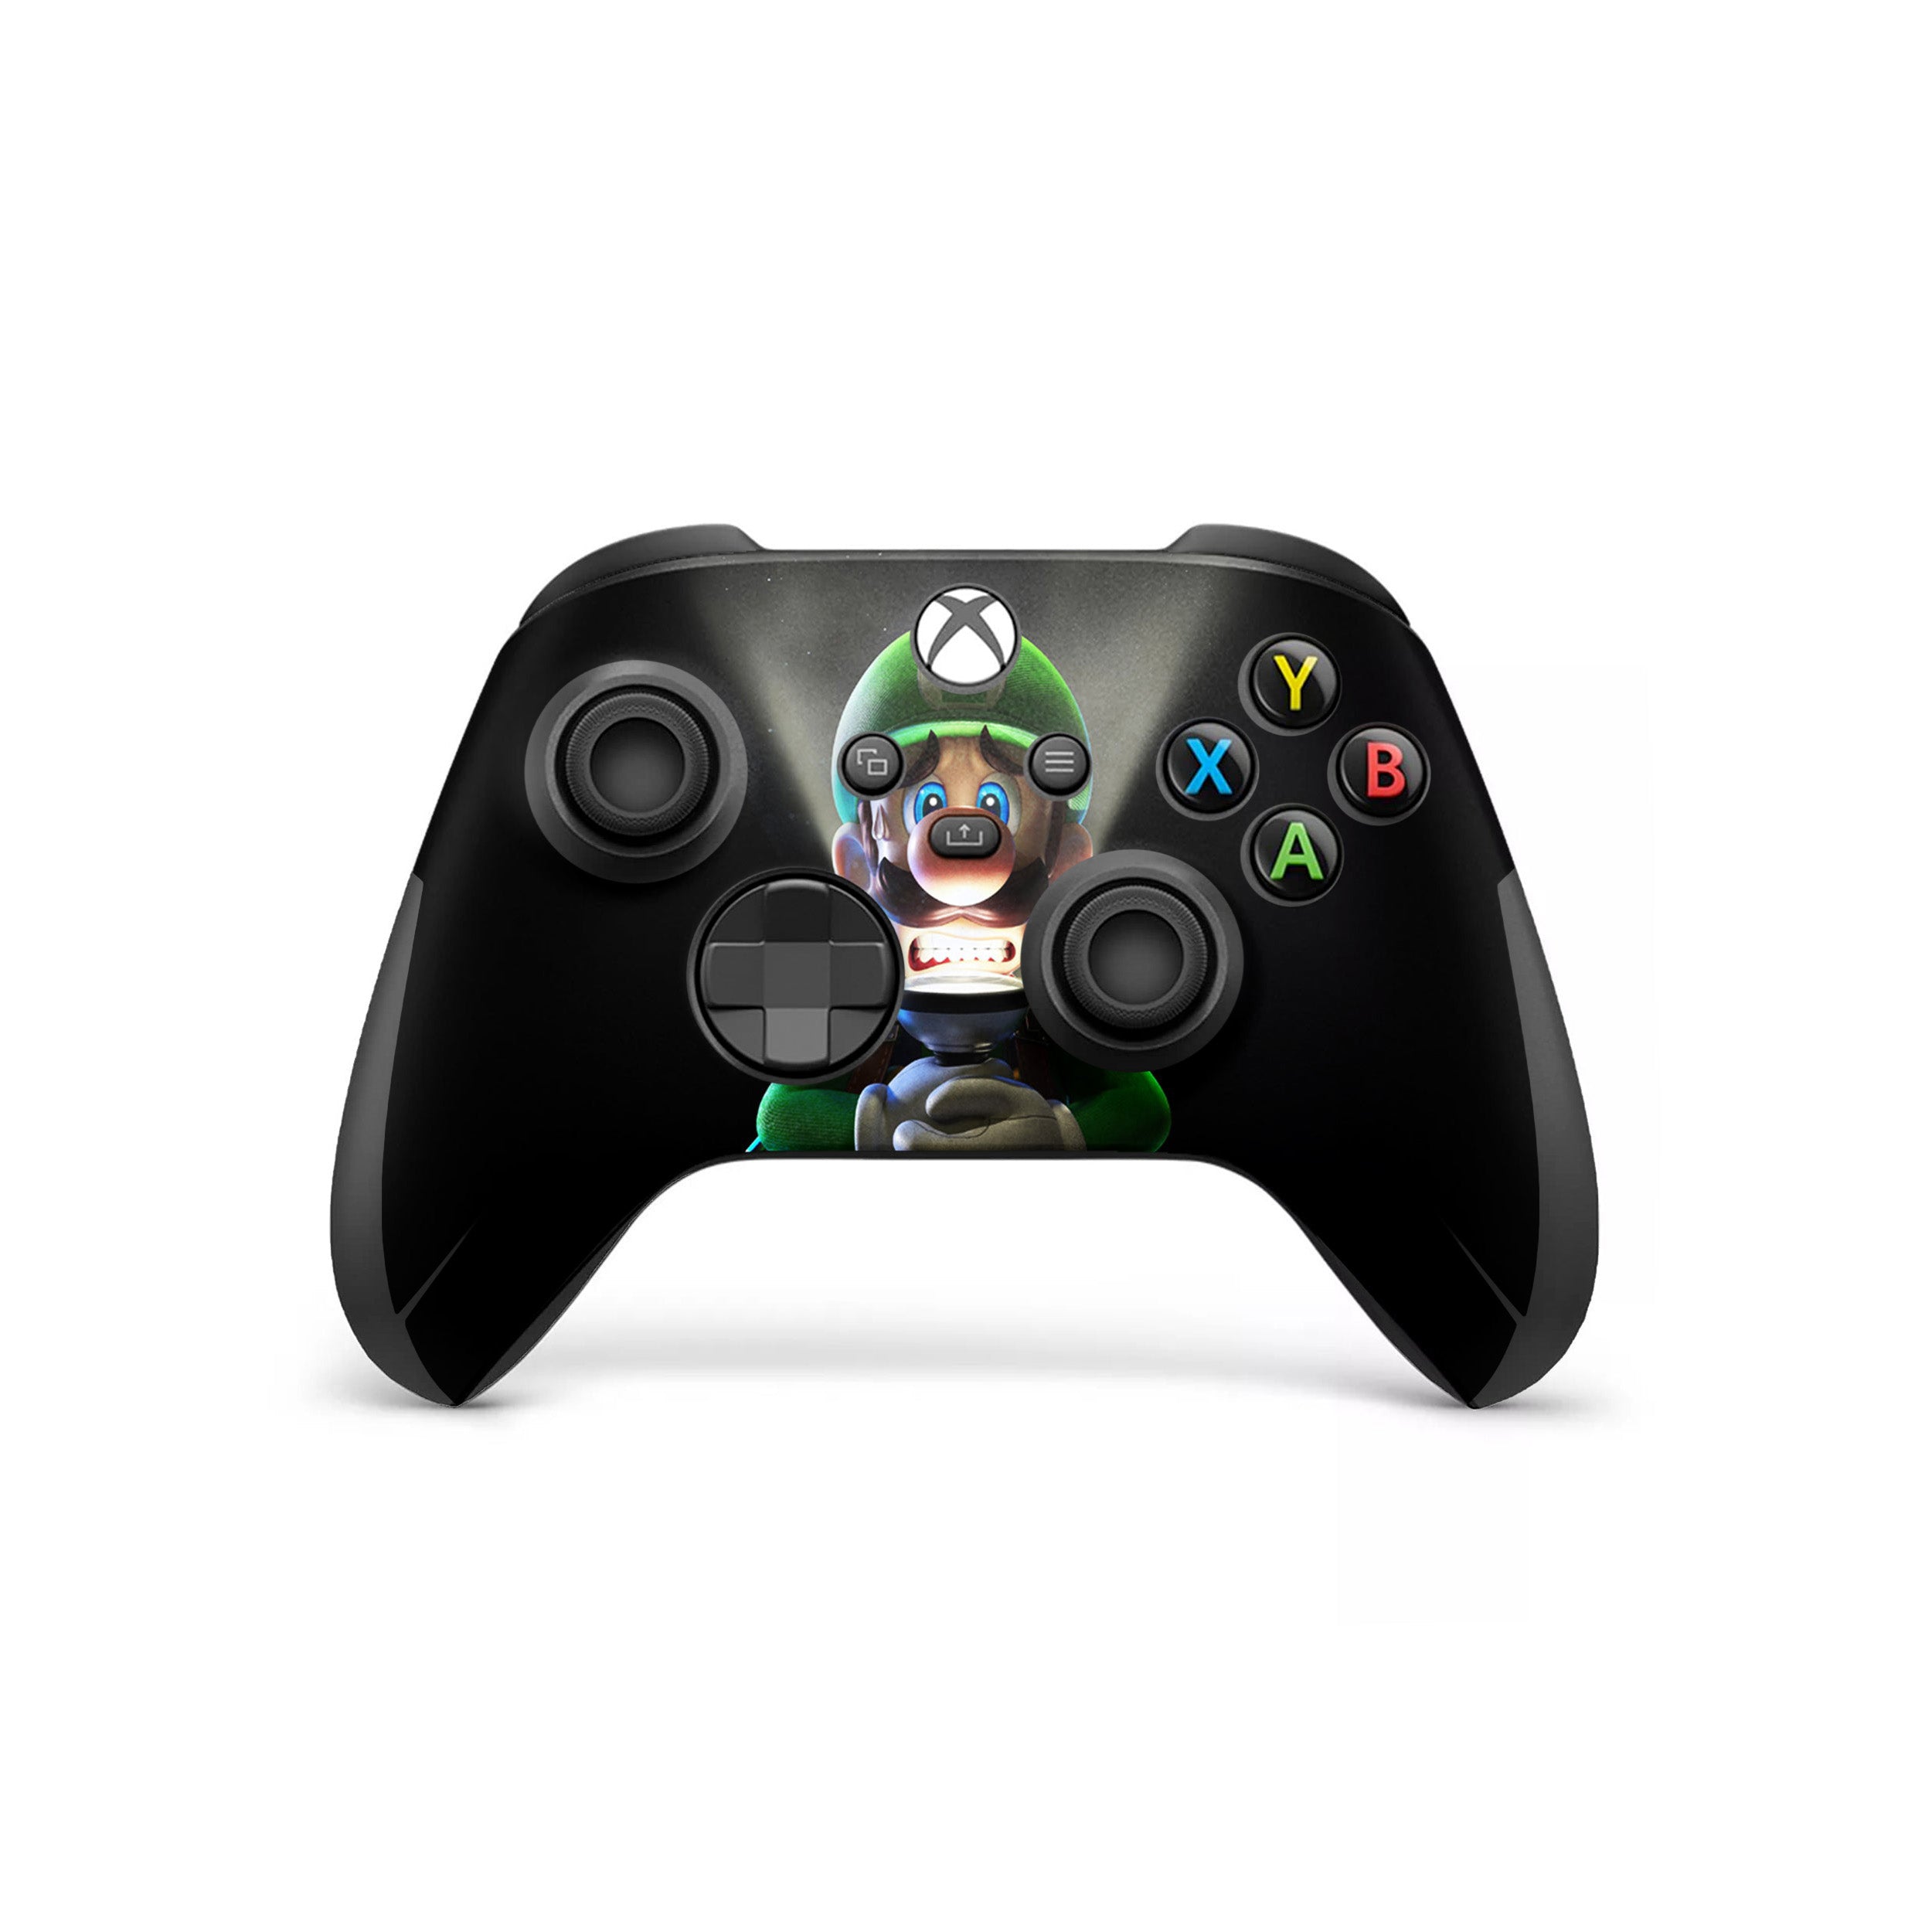 A video game skin featuring a Luigi design for the Xbox Wireless Controller.